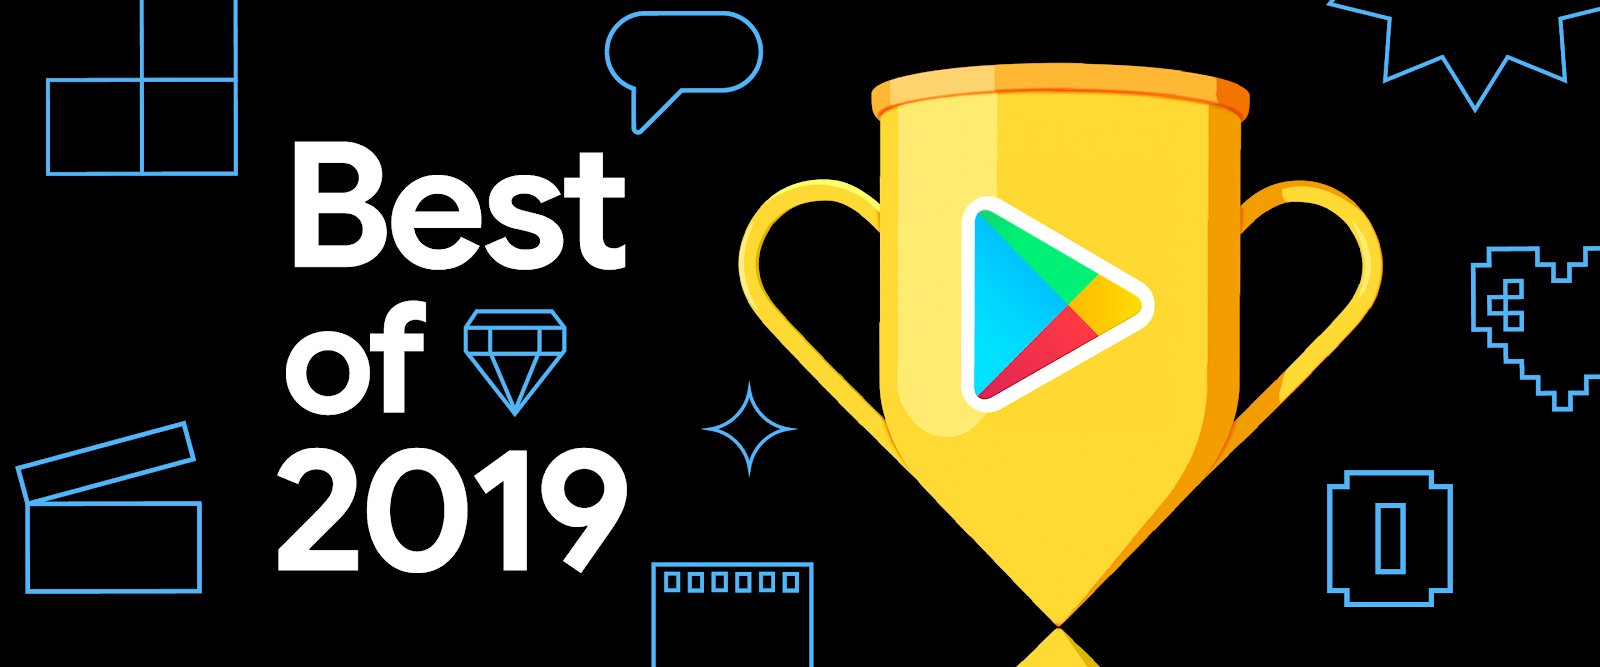 Google Play's Best of 2019 apps, games: Call of Duty, Ablo emerge as winners